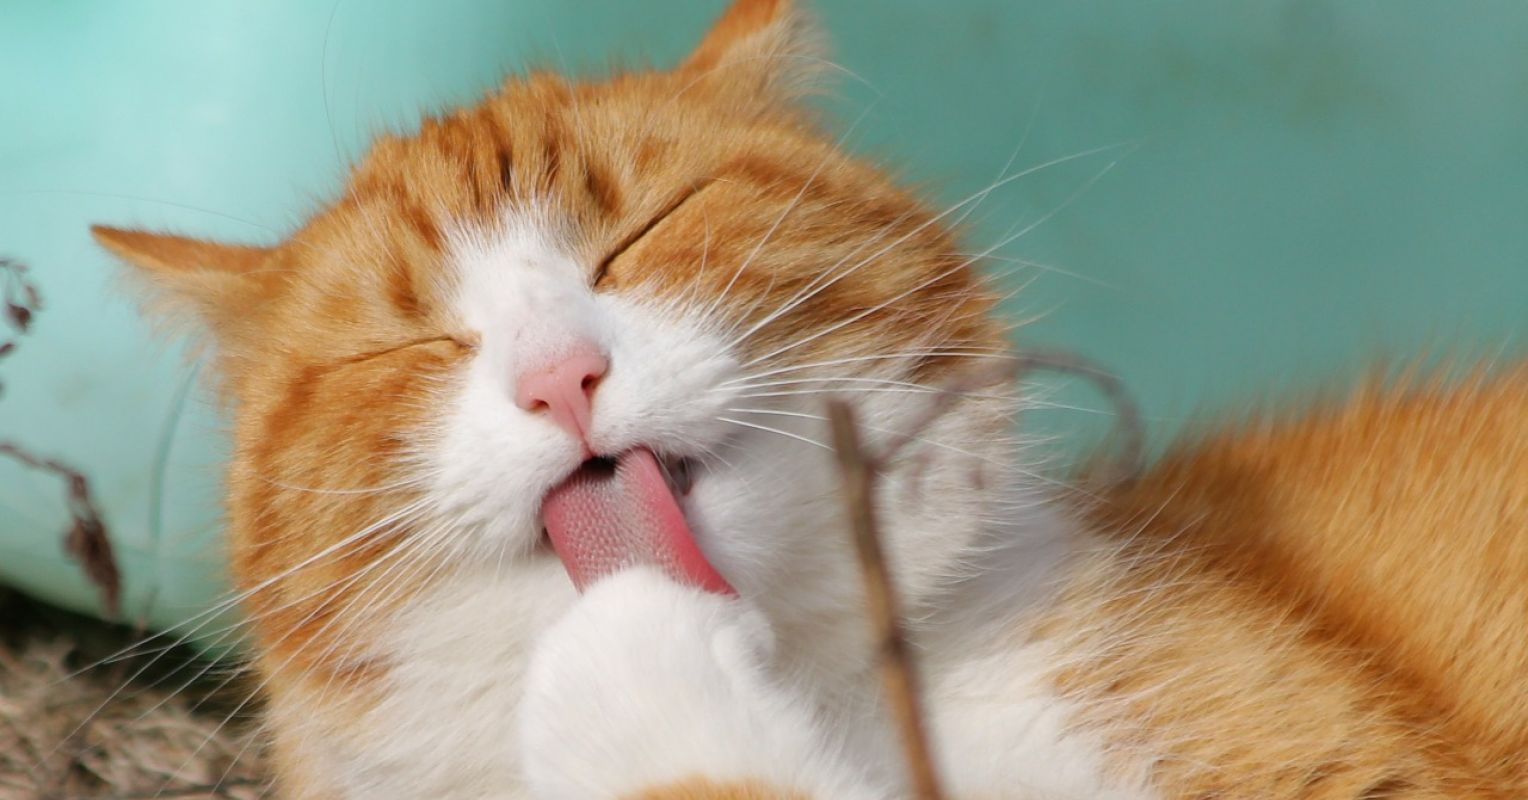 Why Orange Cats Are So Special, According to Science